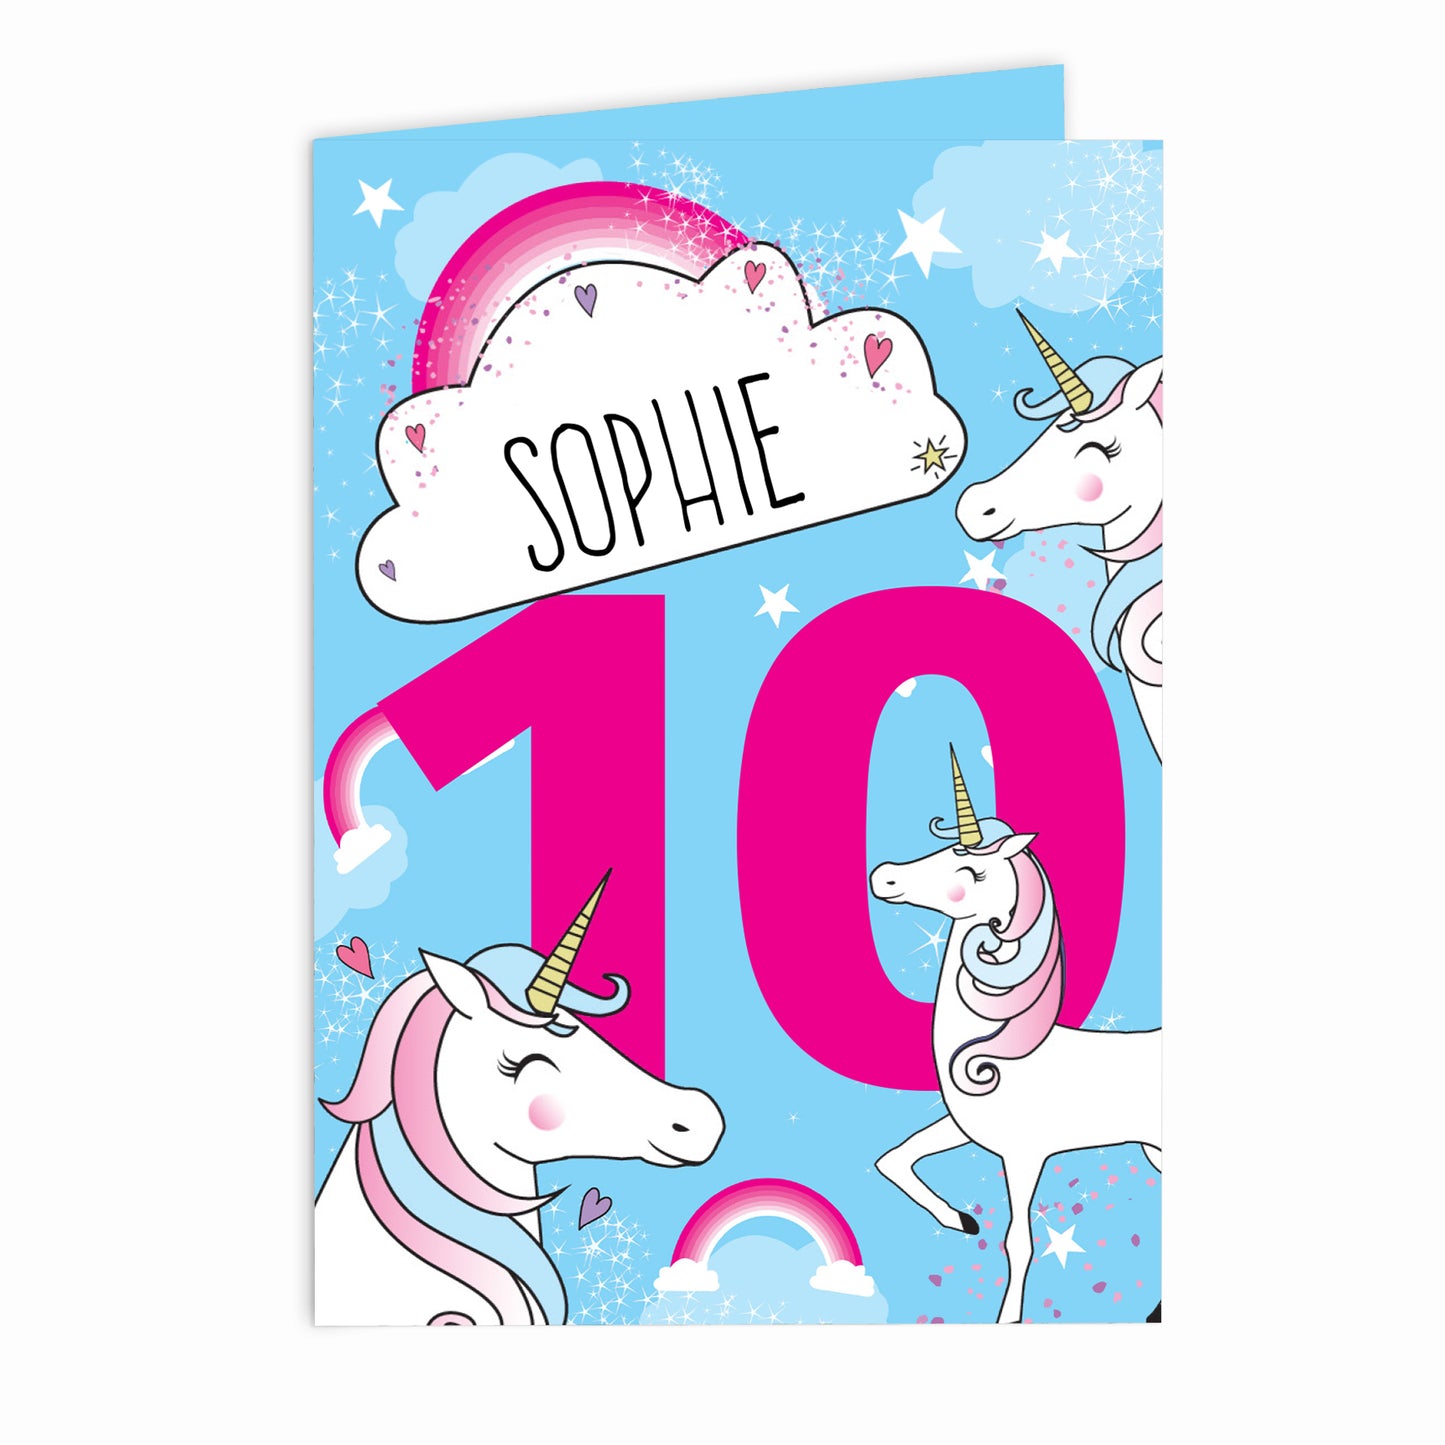 Personalised Unicorn Birthday Card Add Any Age & Name - Personalise It!